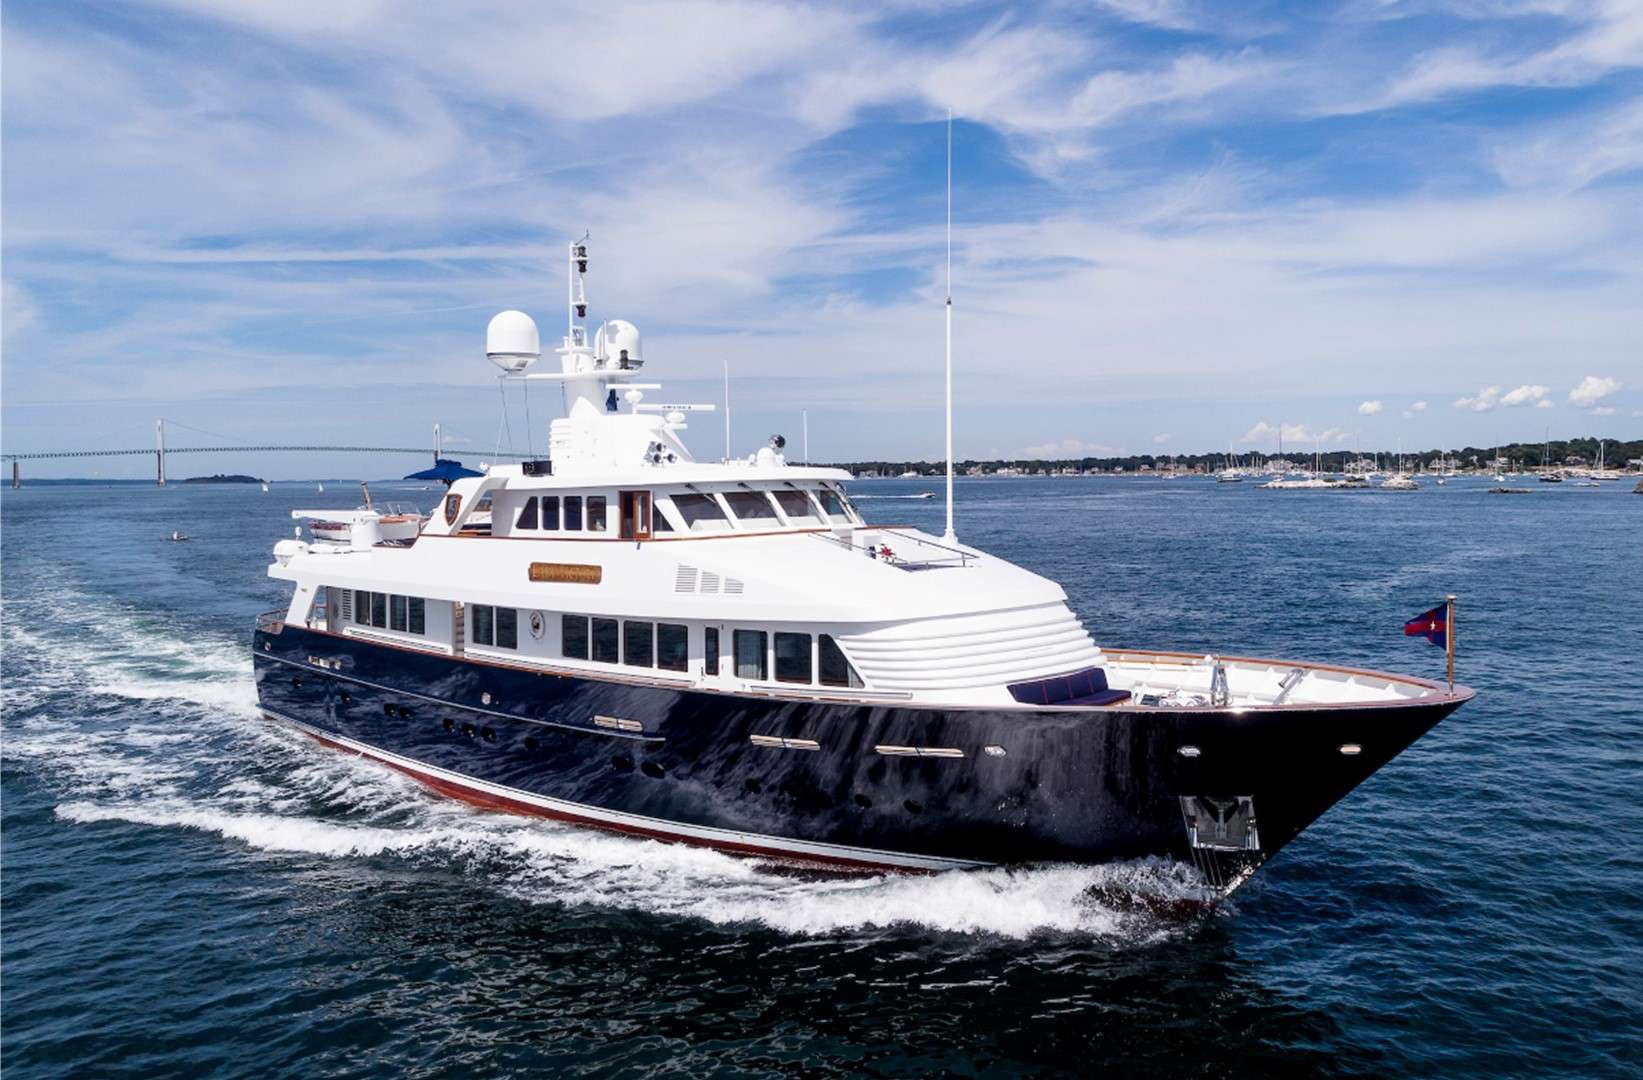 BROKER-FRIENDLY VIDEO: https://youtu.be/MCLxTergWd8

LADY VICTORIA offers a complete escape from the average and ordinary. A true gentleman&rsquo;s yacht, she is a haven of impeccable elegance.

Her gracefully classic exterior lines are complemented by a refined interior that suggests the atmosphere of an exclusive club. Beautiful French doors open from the aft deck into the expansive salon, where soft, cream-colored furnishings lend a light, contemporary touch to masterfully crafted, curved wood paneling accented with gold. The salon opens to the dining area and a large oval table whose supremely comfortable chairs invite lingering over candlelit dinners. Farther forward, a door leads into the owner's private, country-style galley. This secondary area provides a unique and convenient addition, with the capacity for everything from complete formal, gourmet delights to simple snacks and drinks.

Also on the main deck, a richly furnished library creates a welcoming spot for quiet pursuits. Recent upgrades include a modern entertainment center with over 400 movies, satellite TV, and a variety of games. This handsome space can be converted to a sleeping cabin with a queen bed, giving the yacht the capability to accommodate up to eight guests.

Three large staterooms are located on the lower deck, just down a spiral staircase. The full-beam master is fitted with a king bed, seating area, and desk. Its his-and-hers bathrooms with spa tub and shower are finished in spectacular golden onyx. A second spa tub is found in the onyx-lined bathroom that accompanies the lovely queen stateroom. In the third stateroom, with two twin beds, the ensuite bathroom has a steam shower framed by a vaulted blue-glass ceiling.

The covered aft deck is a popular spot for casual meals and cocktails. Its high-gloss varnished mahogany chairs, along with dark blue and red piping-accented cushions, suggest the feeling of a stylish yacht club and invite relaxed conversations.

Up on the sundeck, guests may choose to stretch out in the lounge chairs or enjoy the scenic views from a table and chairs set beneath large umbrellas. A new entertainment center has been added here for listening and viewing pleasure. The Jacuzzi, with ample space for up to six, is an irresistible place to unwind in the gentle breeze or beneath the stars. The Jacuzzi can also be converted to a comfortable sunbed.

LADY VICTORIA has the full complement of water toys. For the ultimate in classic style, she also carries a sleek, 18-foot Riva Junior motorboat, which has been completely restored to concours d&rsquo;elegance standards. Complementing the Riva is a 16-foot hard-bottom inflatable that's perfect for watersport activities and exploratory excursions.

Led by her gracious and exceptionally experienced captain, LADY VICTORIA&rsquo;s crew look forward to creating a memorable, five-star experience custom-designed for her guests.